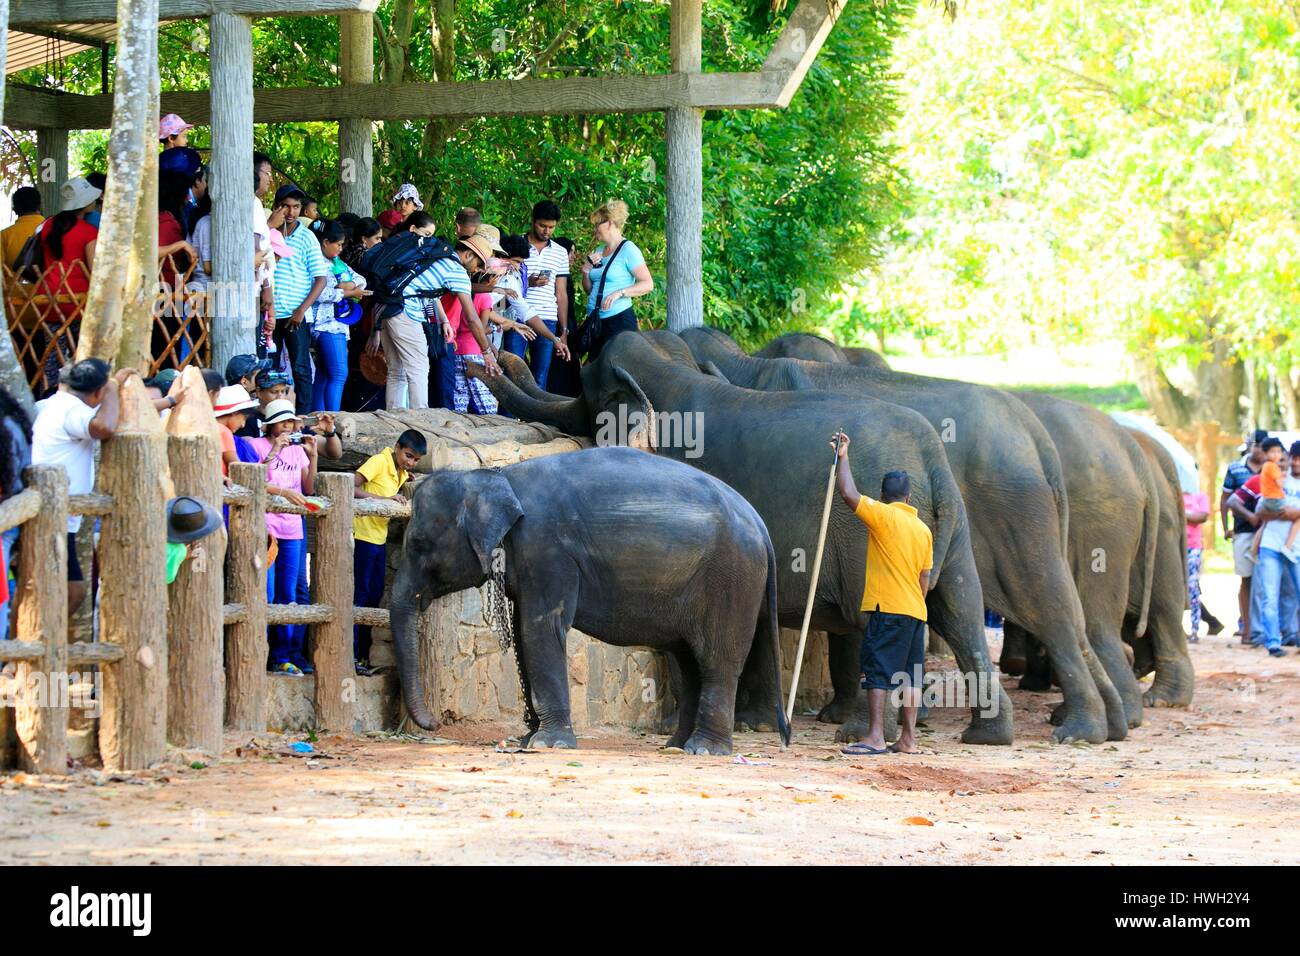 Sri Lanka, Pinnawala, Sri lankan elephants (Elephas maximus maximus) from Pinnawala Elephant Orphanage; open to the public, part of a scheme run by the Sri Lankan Department of Wildlife, with their carers nearby Stock Photo